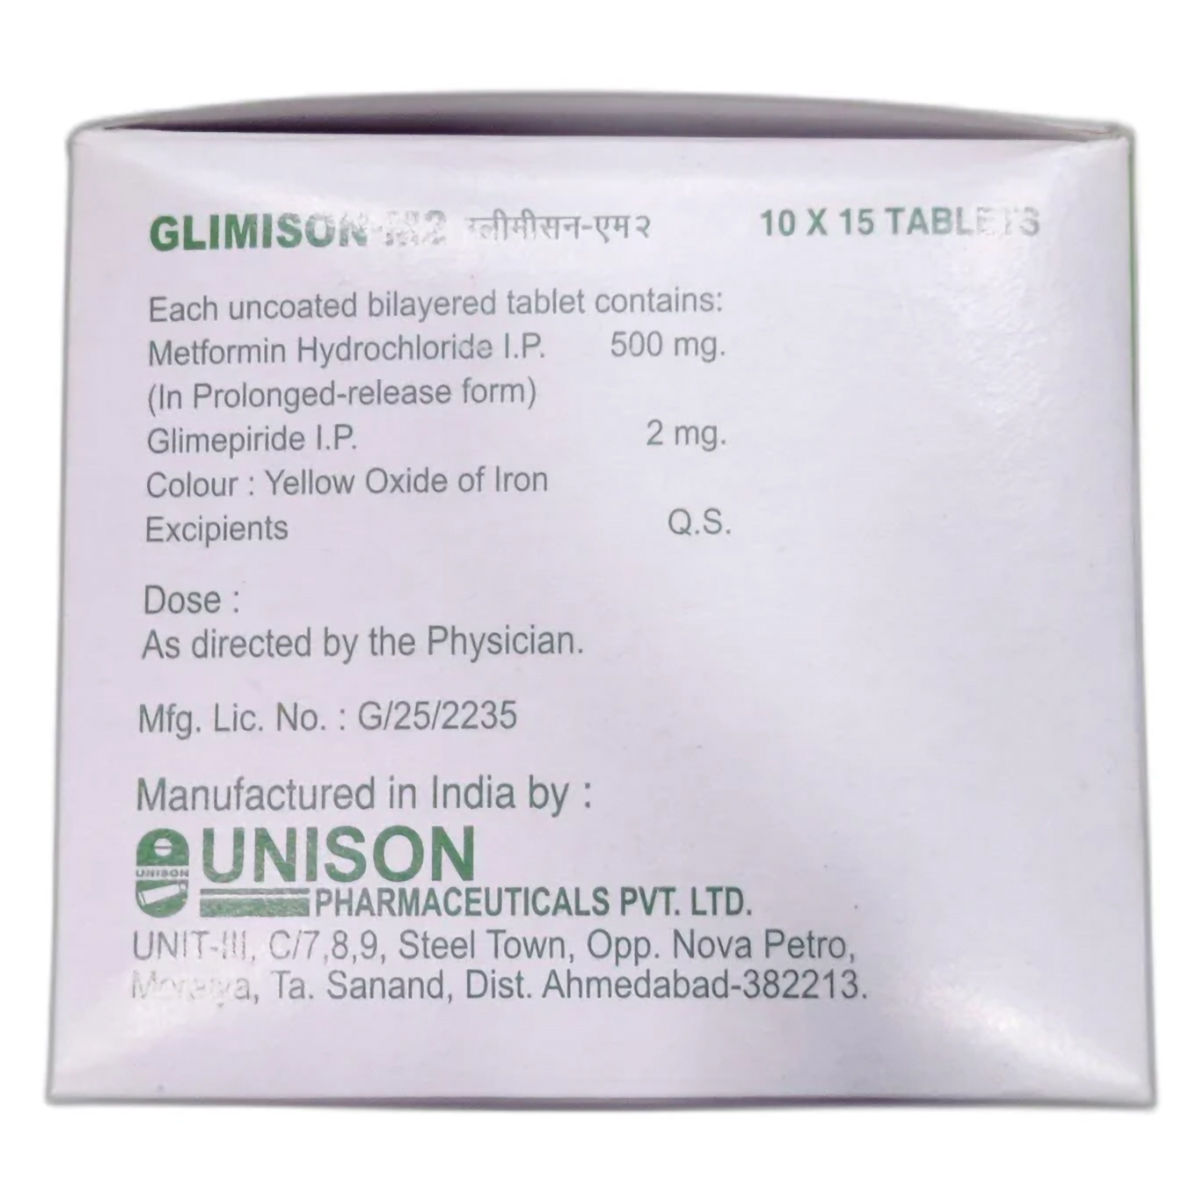 Glimison-M2 Tablet 15's, Pack of 15 TabletS